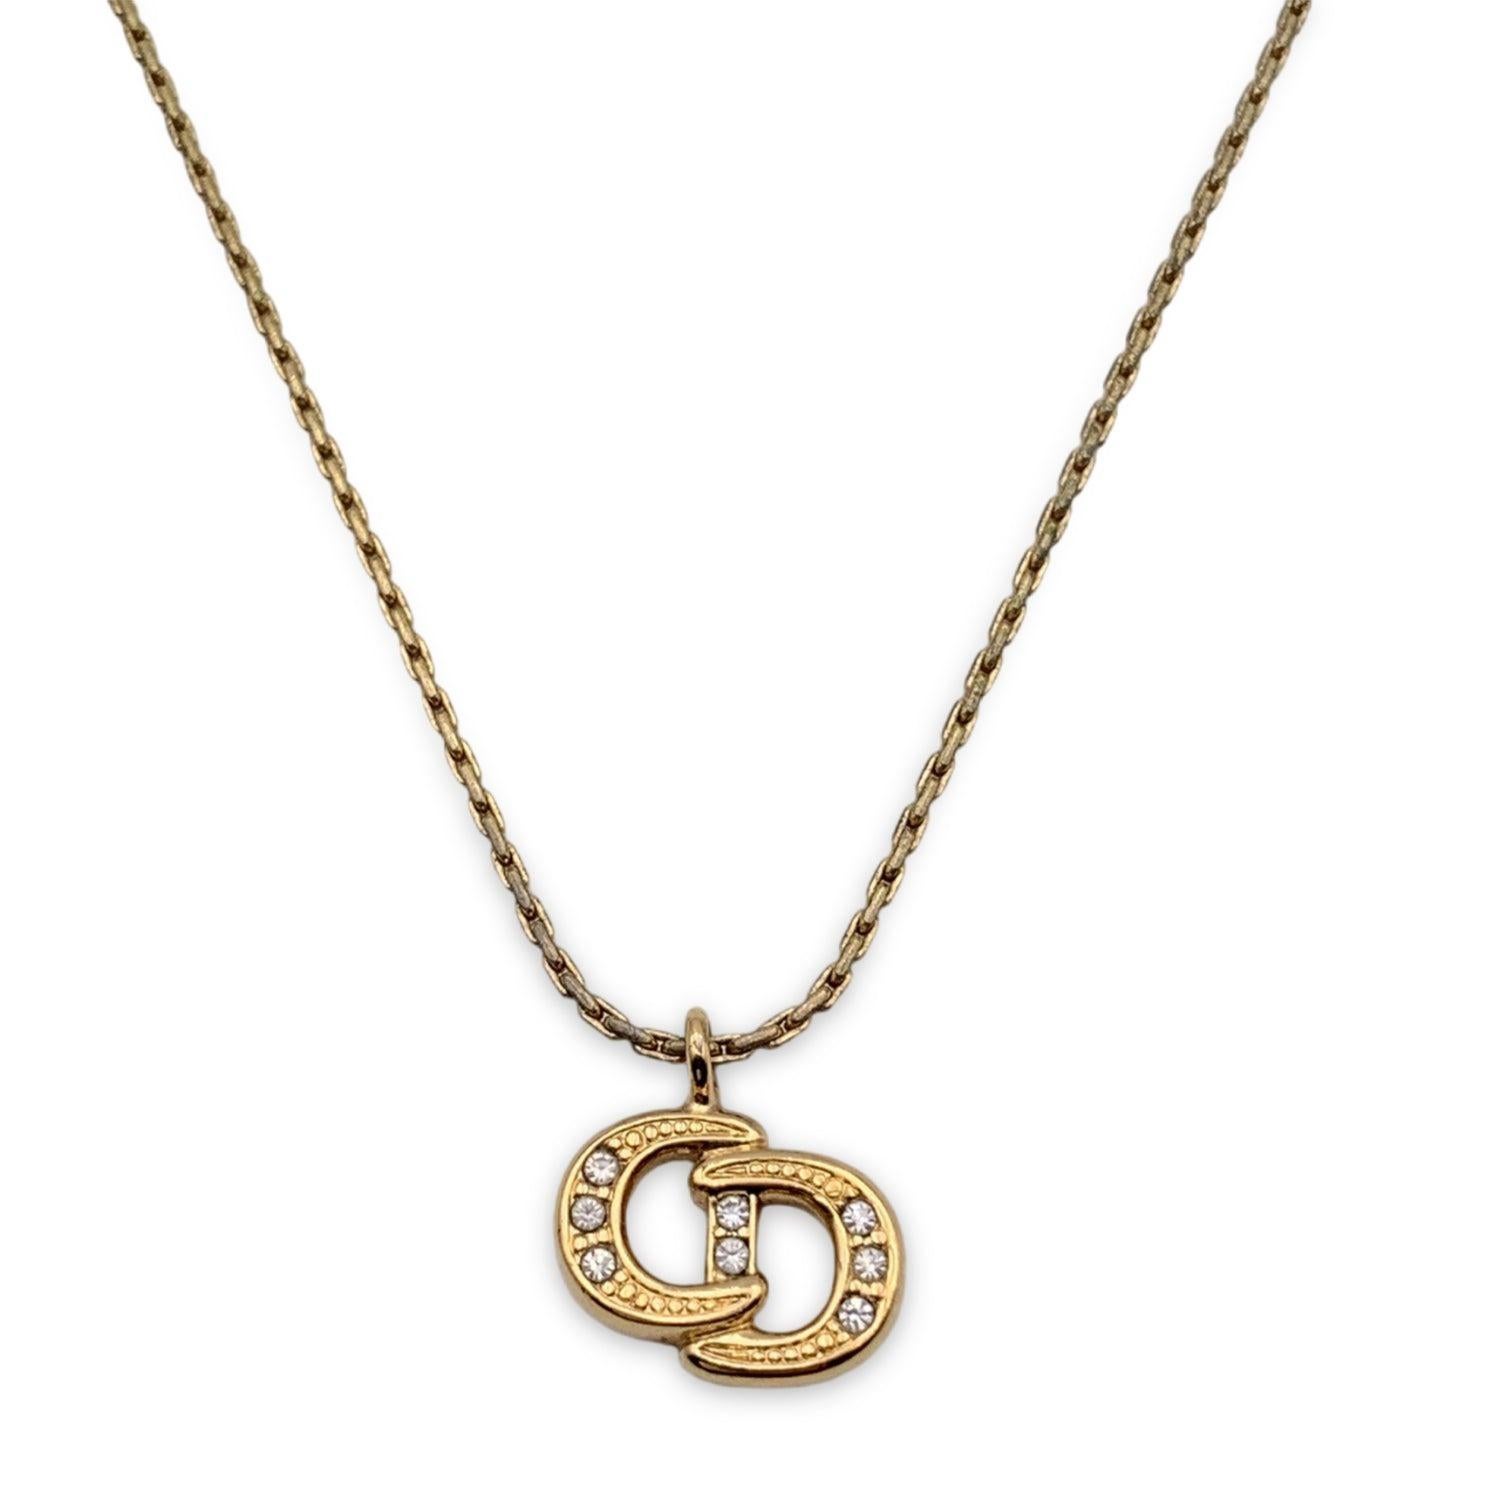 Vintage Christian Dior gold metal chain necklace with CD logo pendant, embellished with 6 small rhinestones. Spring ring closure. Small CD charm at the end of the necklace. Chain length: about 16.5 inches - 42 cm Condition A - EXCELLENT Gently used.